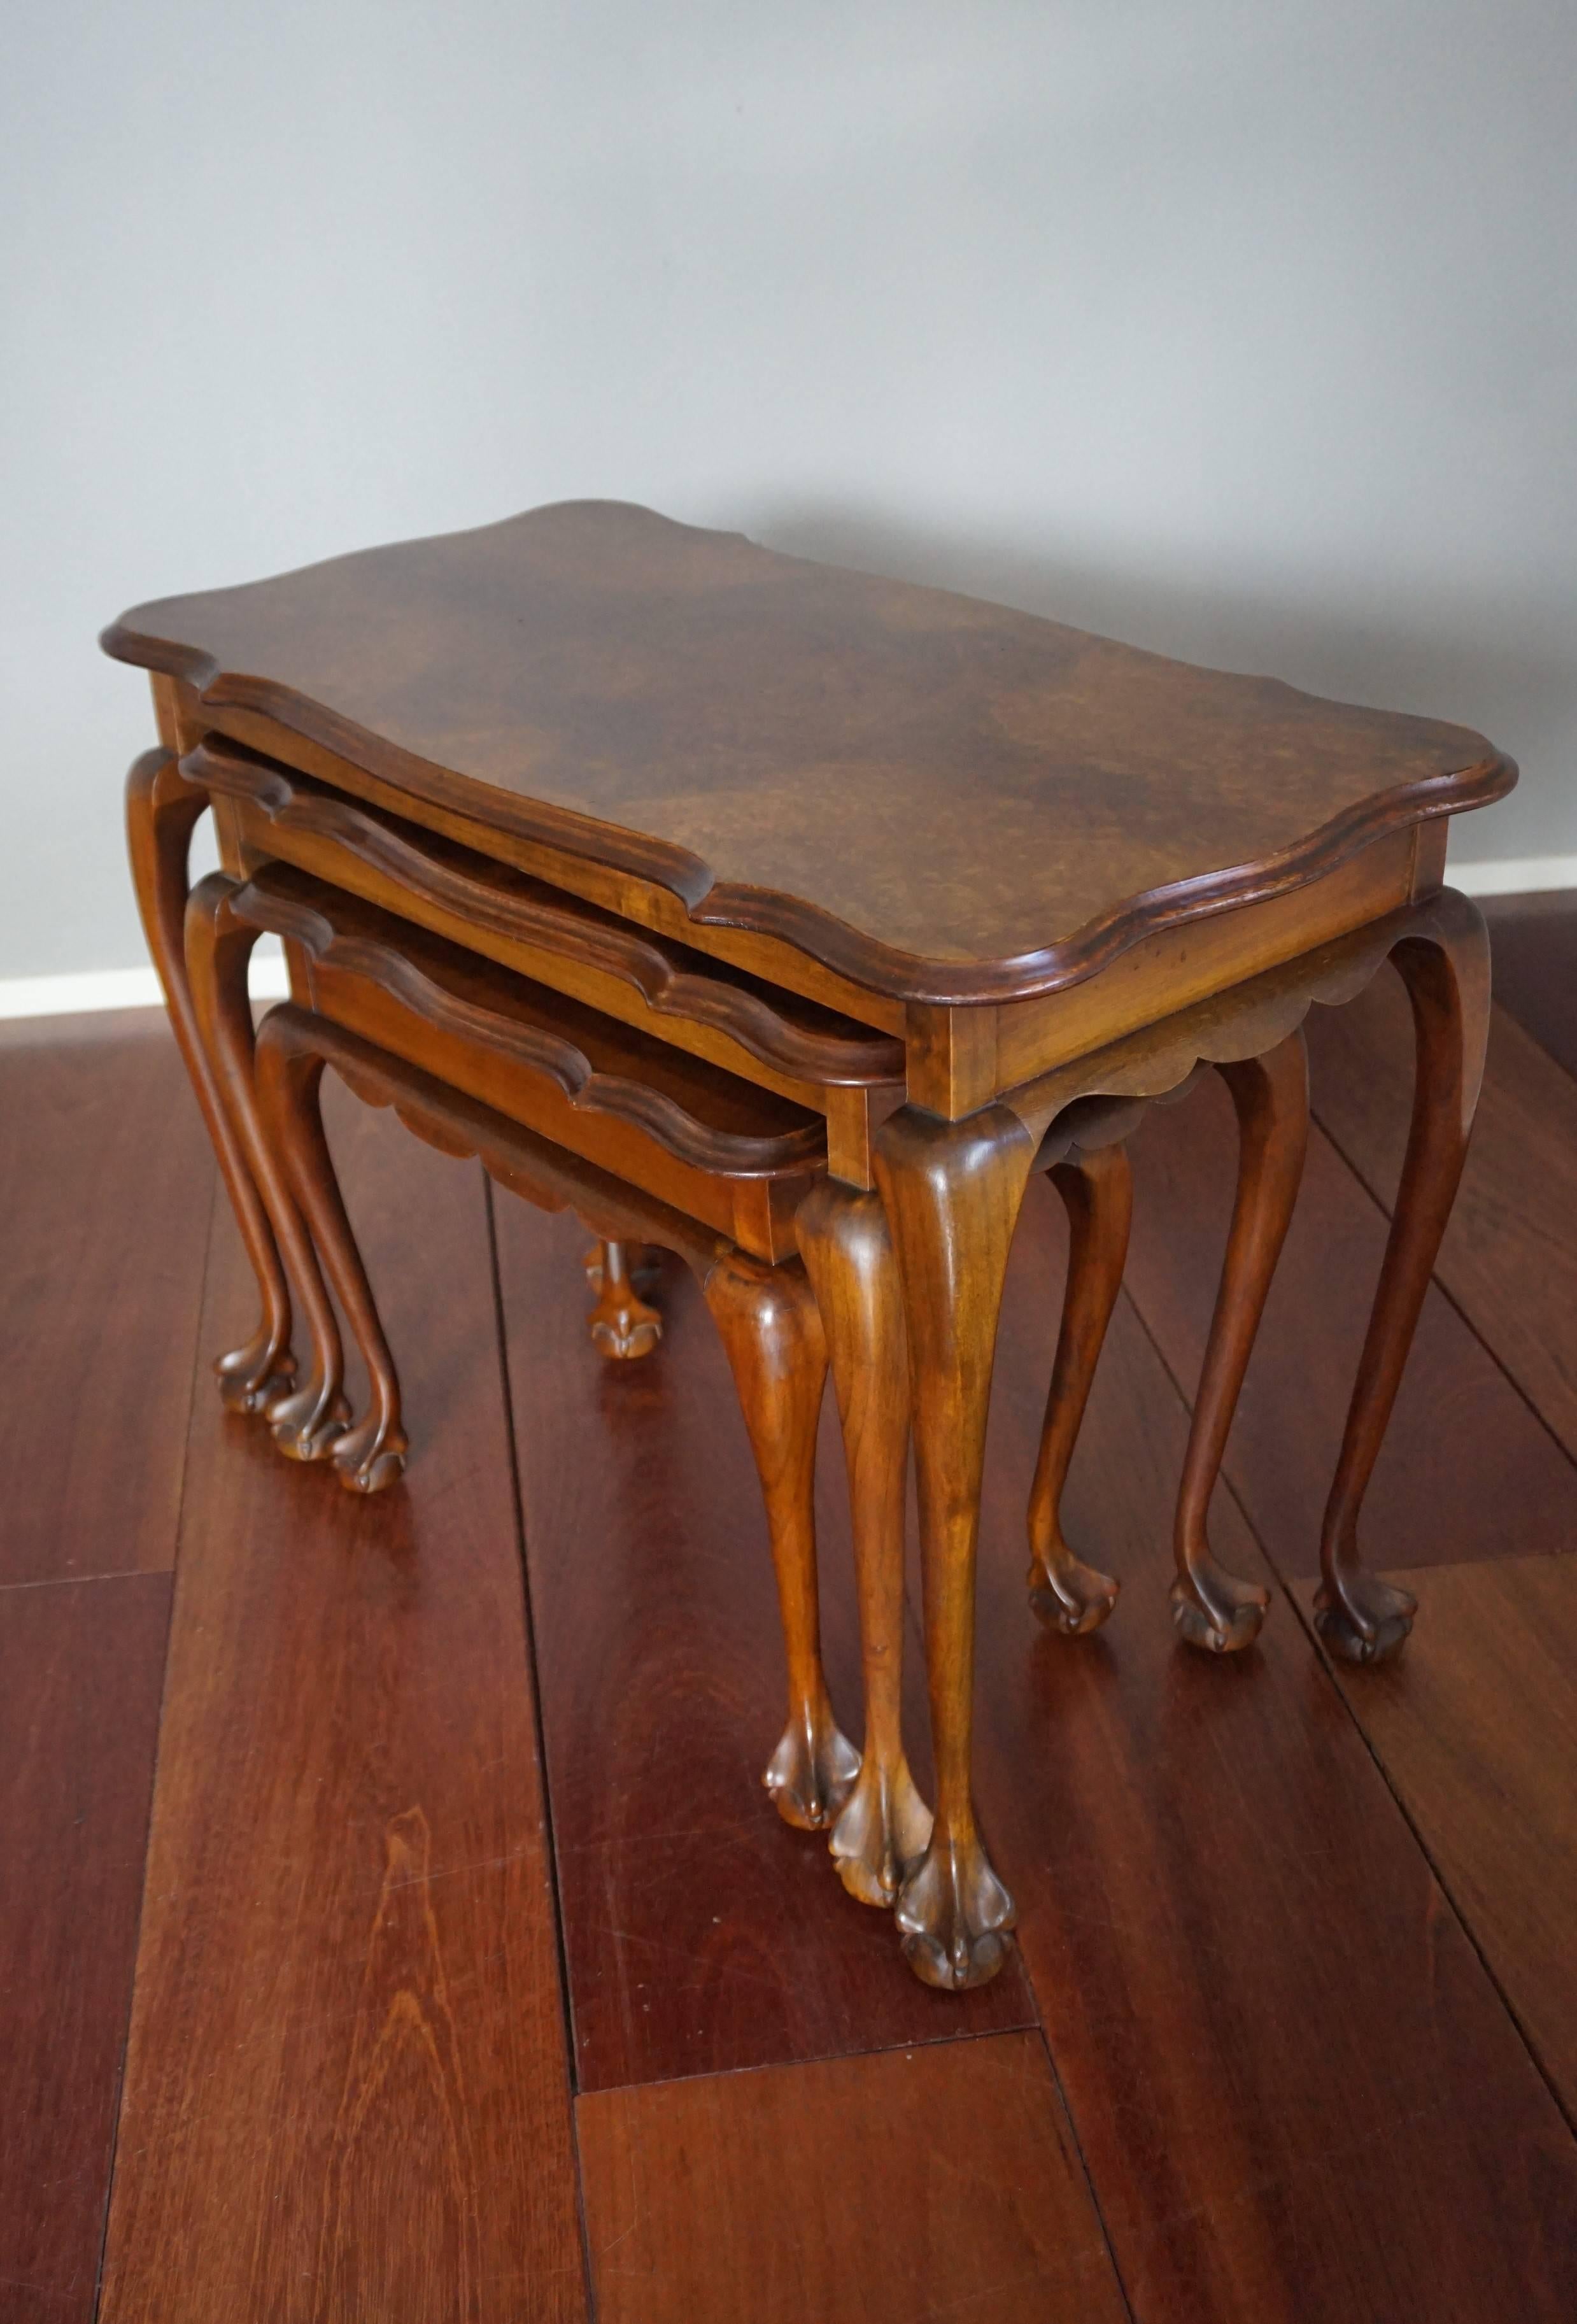 Fine Mid-20th Century Queen Anne Style Nutwood Nest of Tables with Burl Inlay For Sale 1